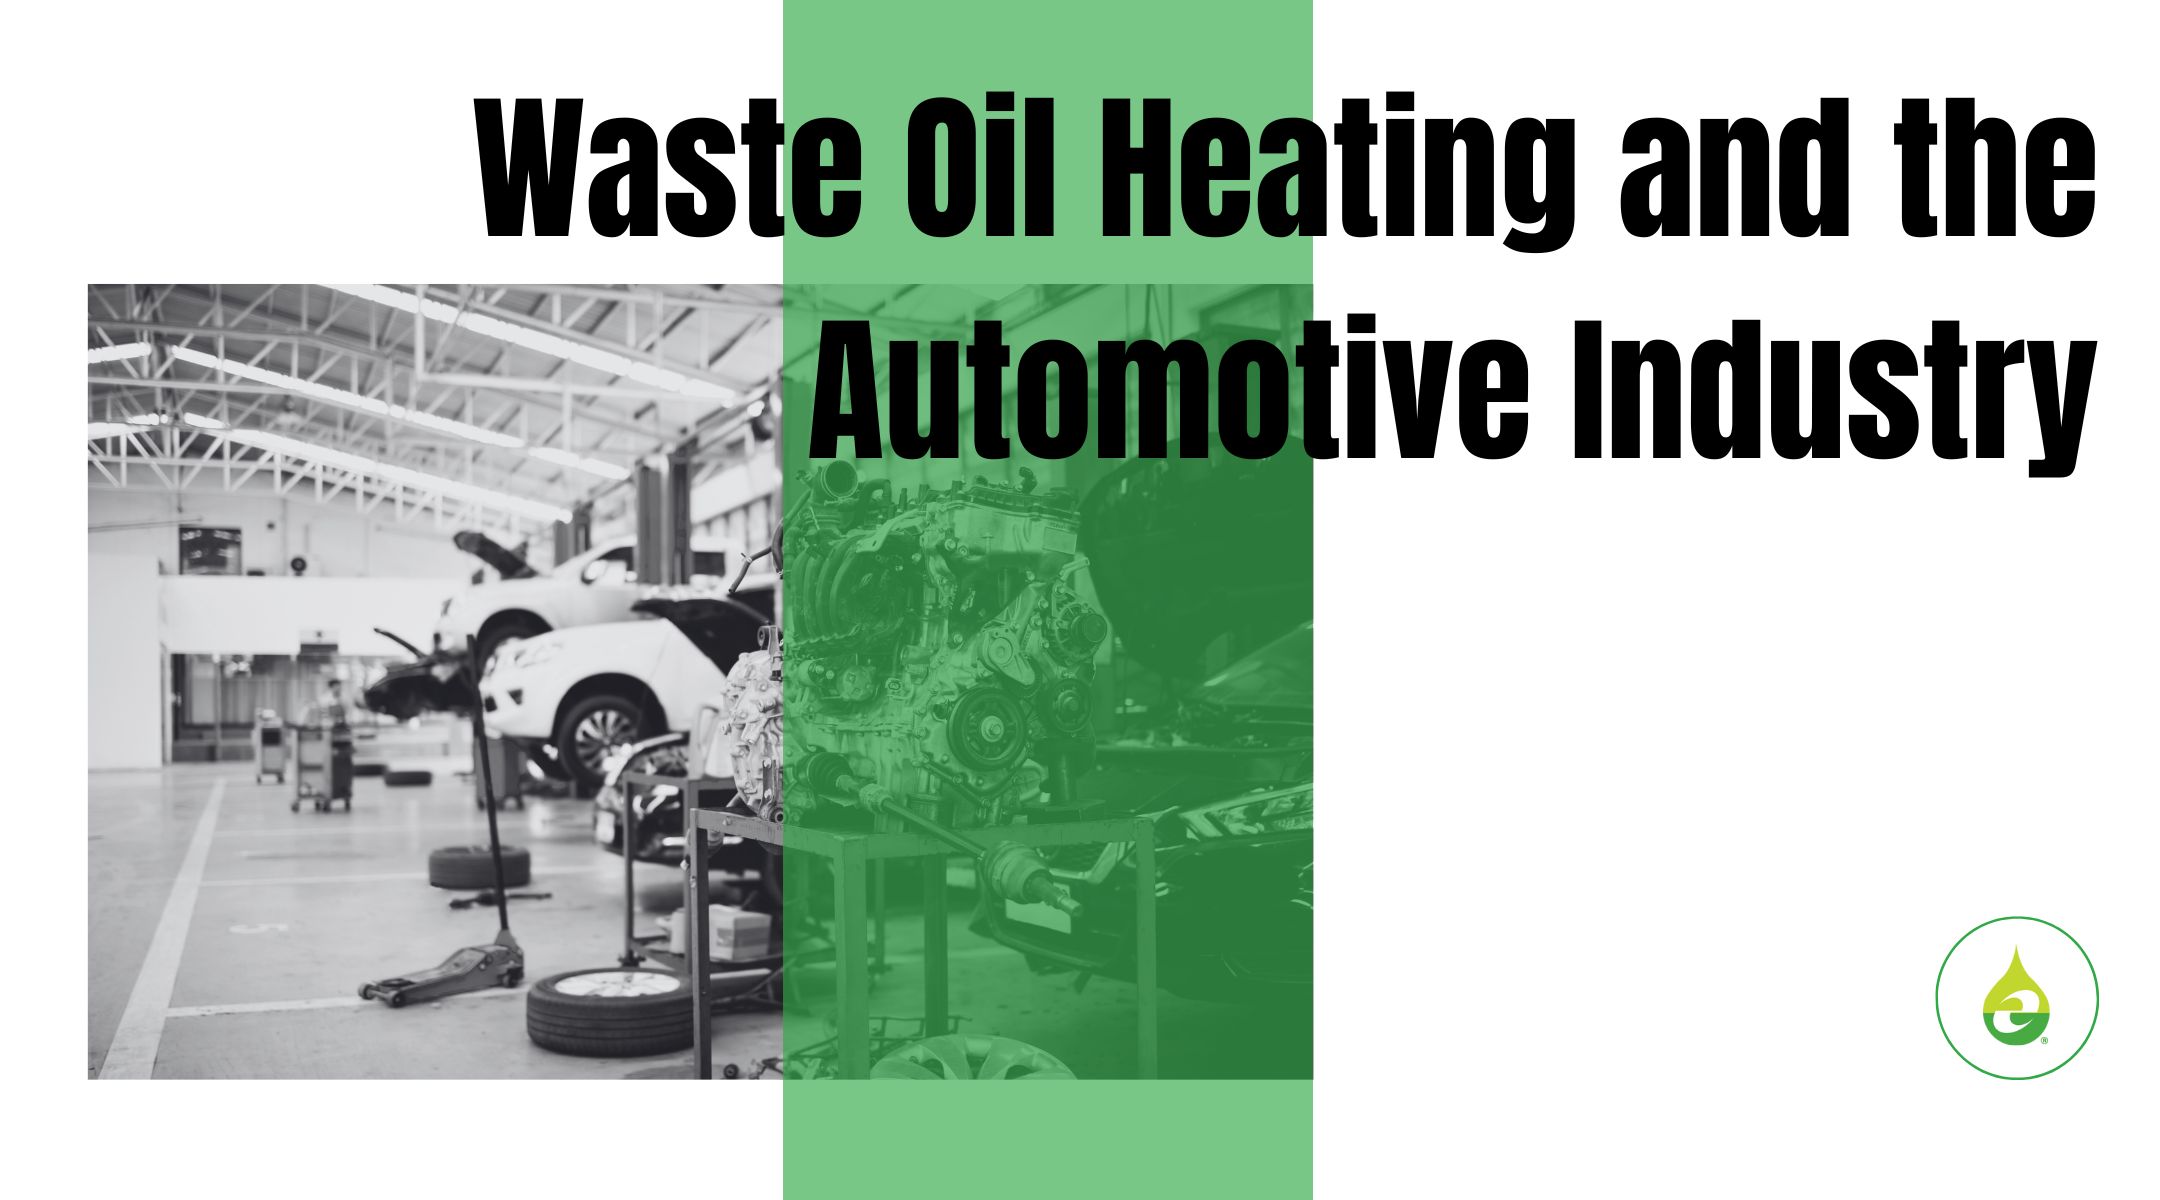 Waste Oil Heating and the Automotive Industry